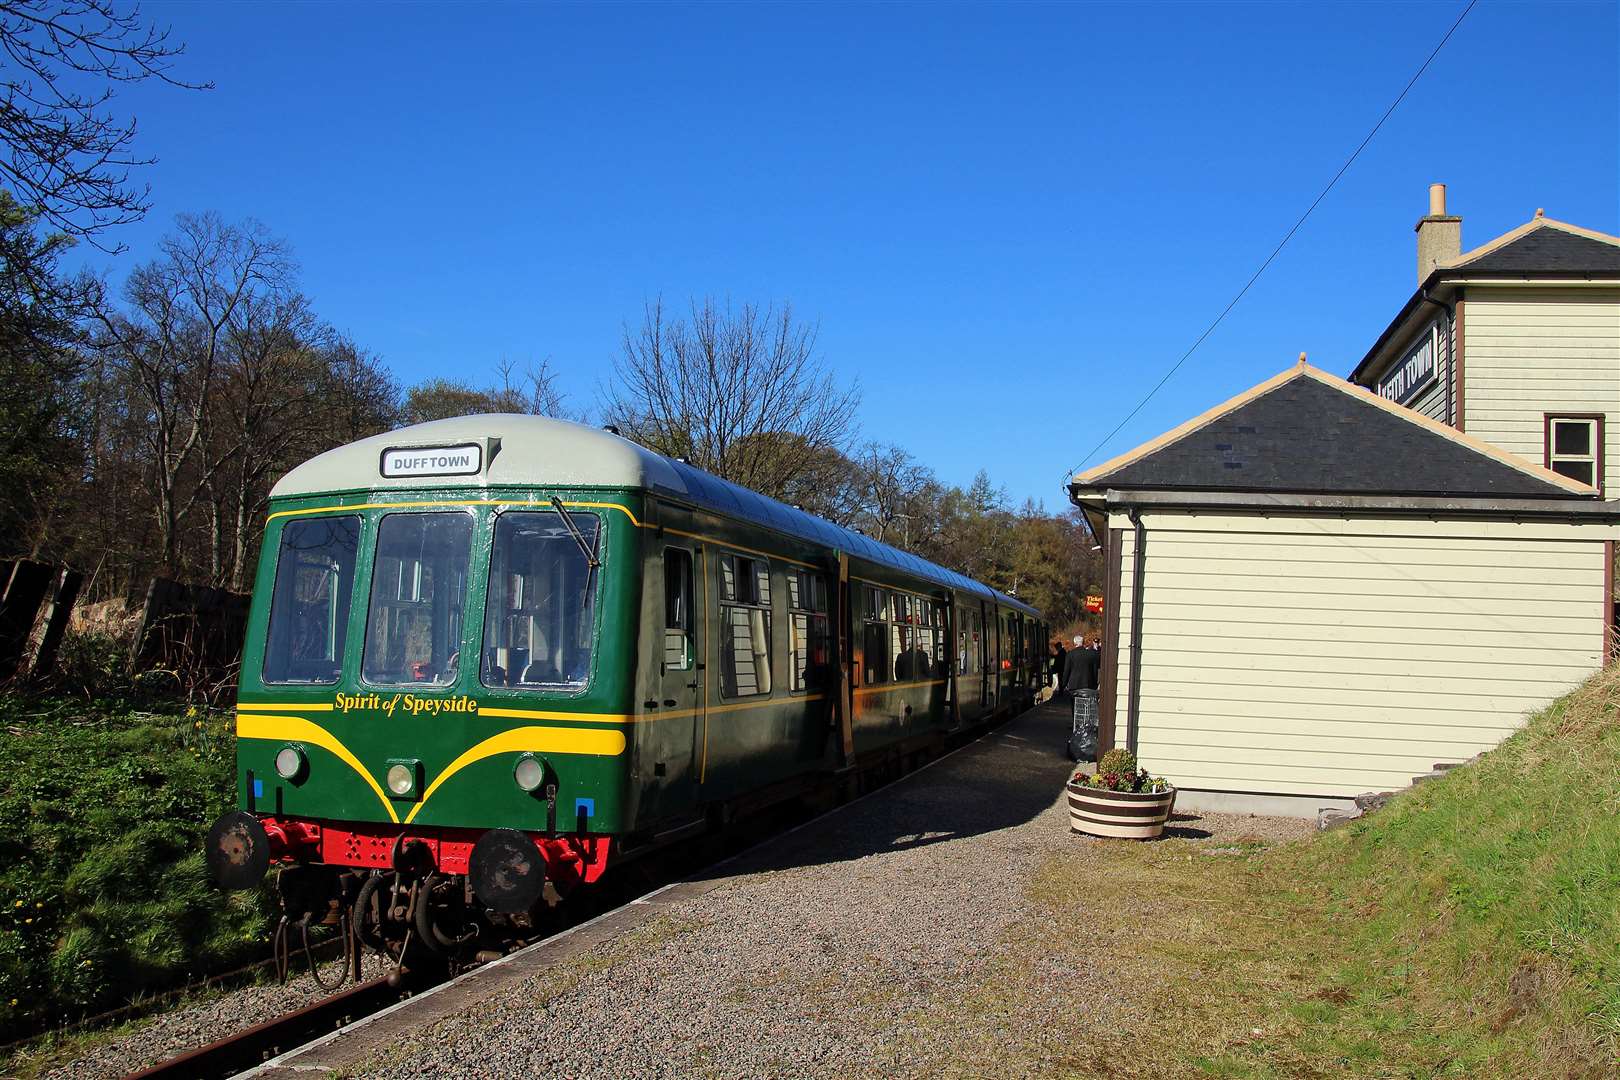 Police say tools were stolen from Keith and Dufftown Railway Association over the weekend.